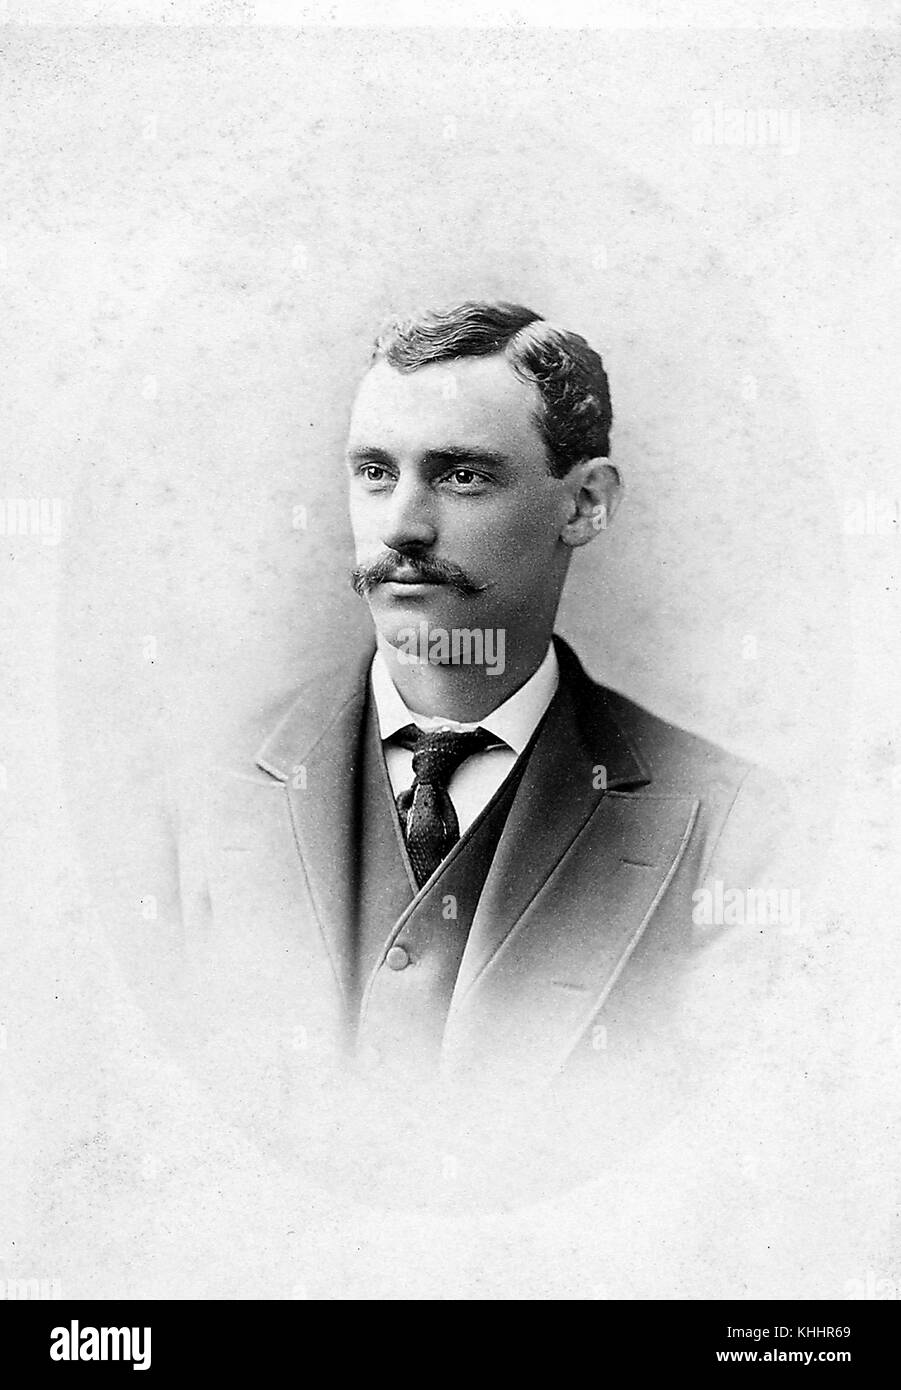 A photographic headshot portrait of John Morrill wearing a suit, during his fourteen year career he was primarily a first baseman and a manager, led the Boston Beaneaters to a National League pendant in 1883 in a season where he played six different positions and took over as manager half way through the season, 1885. From the New York Public Library. Stock Photo